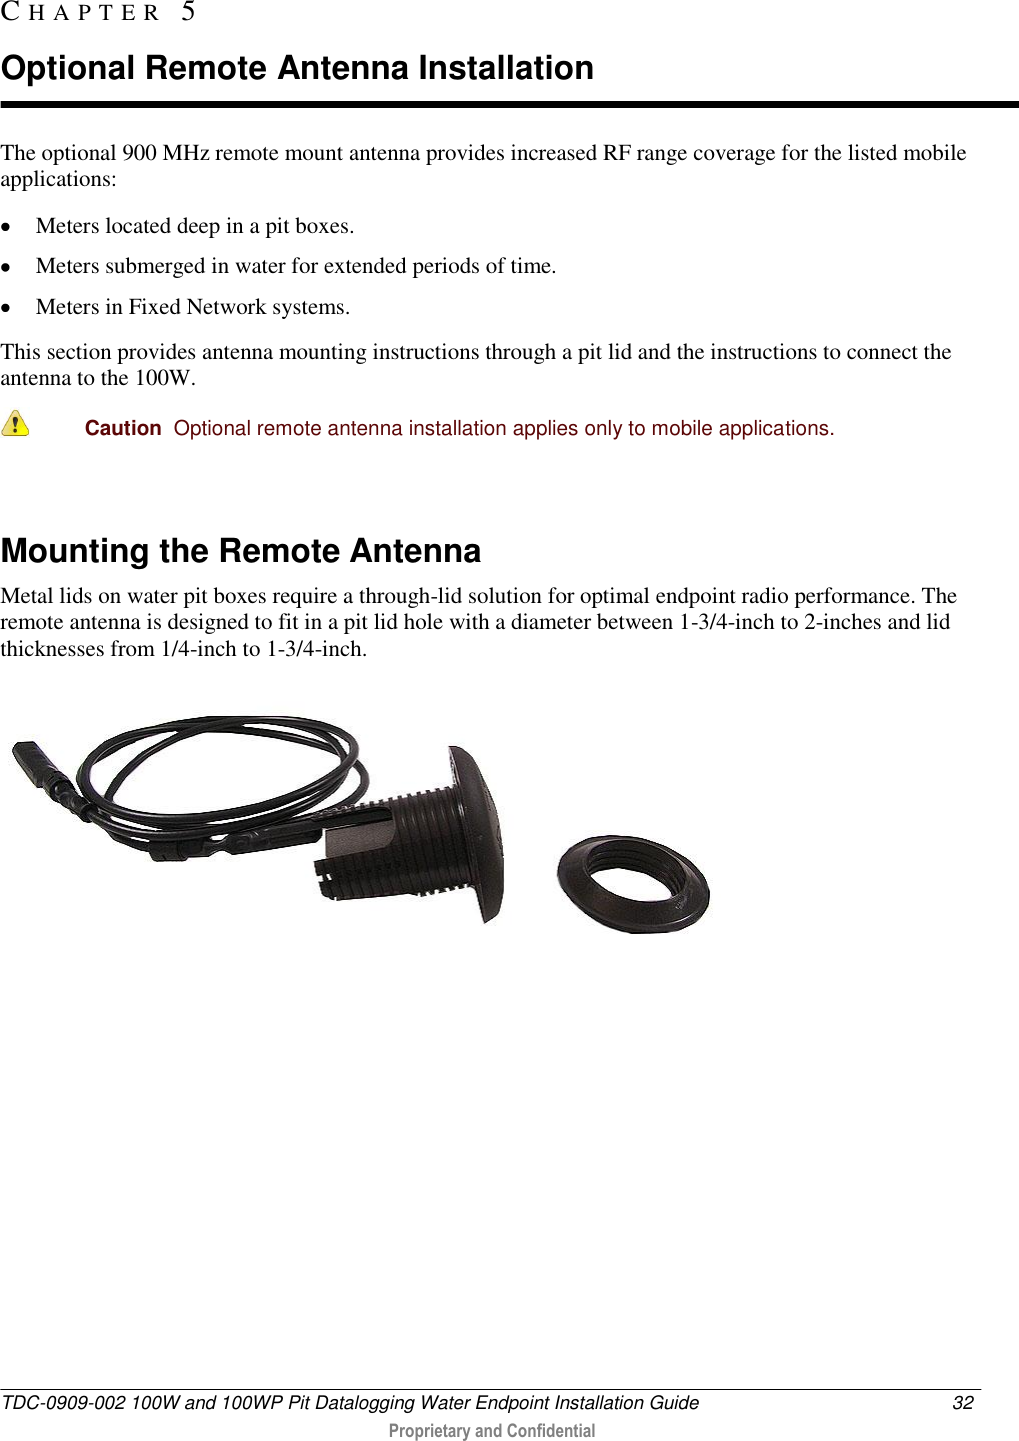  TDC-0909-002 100W and 100WP Pit Datalogging Water Endpoint Installation Guide  32   Proprietary and Confidential     The optional 900 MHz remote mount antenna provides increased RF range coverage for the listed mobile applications:  Meters located deep in a pit boxes.  Meters submerged in water for extended periods of time.   Meters in Fixed Network systems. This section provides antenna mounting instructions through a pit lid and the instructions to connect the antenna to the 100W.  Caution  Optional remote antenna installation applies only to mobile applications.    Mounting the Remote Antenna Metal lids on water pit boxes require a through-lid solution for optimal endpoint radio performance. The remote antenna is designed to fit in a pit lid hole with a diameter between 1-3/4-inch to 2-inches and lid thicknesses from 1/4-inch to 1-3/4-inch.  CH A P T E R   5  Optional Remote Antenna Installation 